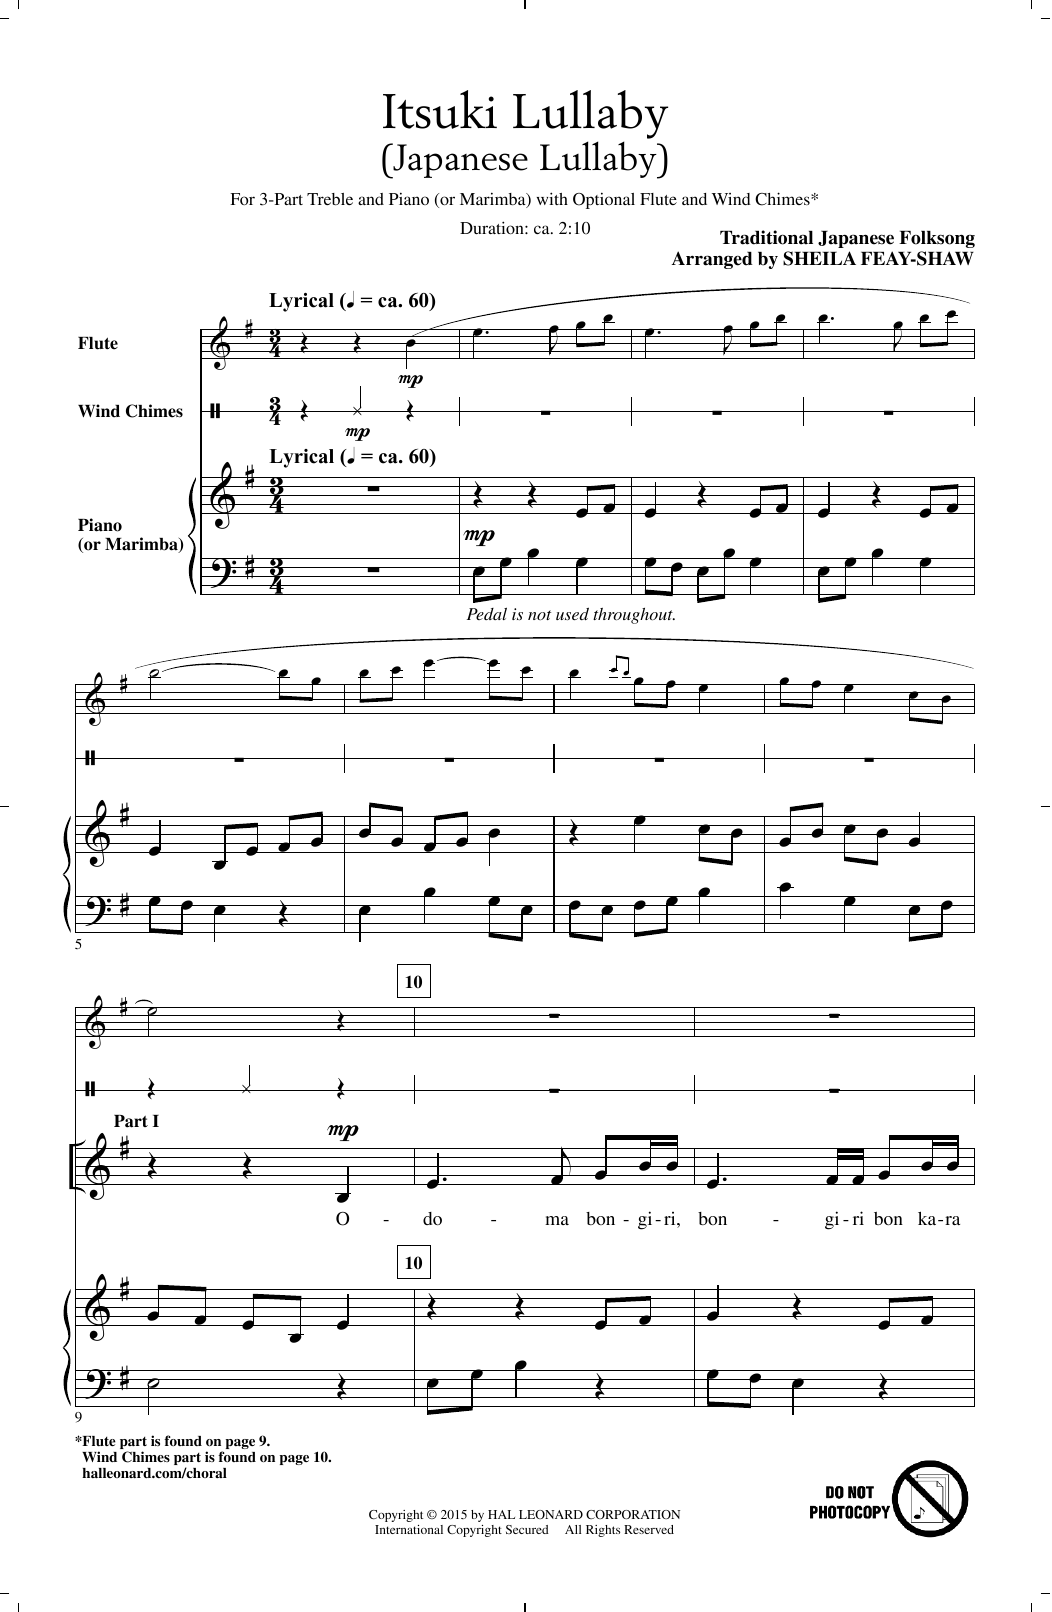 Sheila Feay-Shaw Itsuki Lullaby sheet music notes and chords arranged for 3-Part Treble Choir